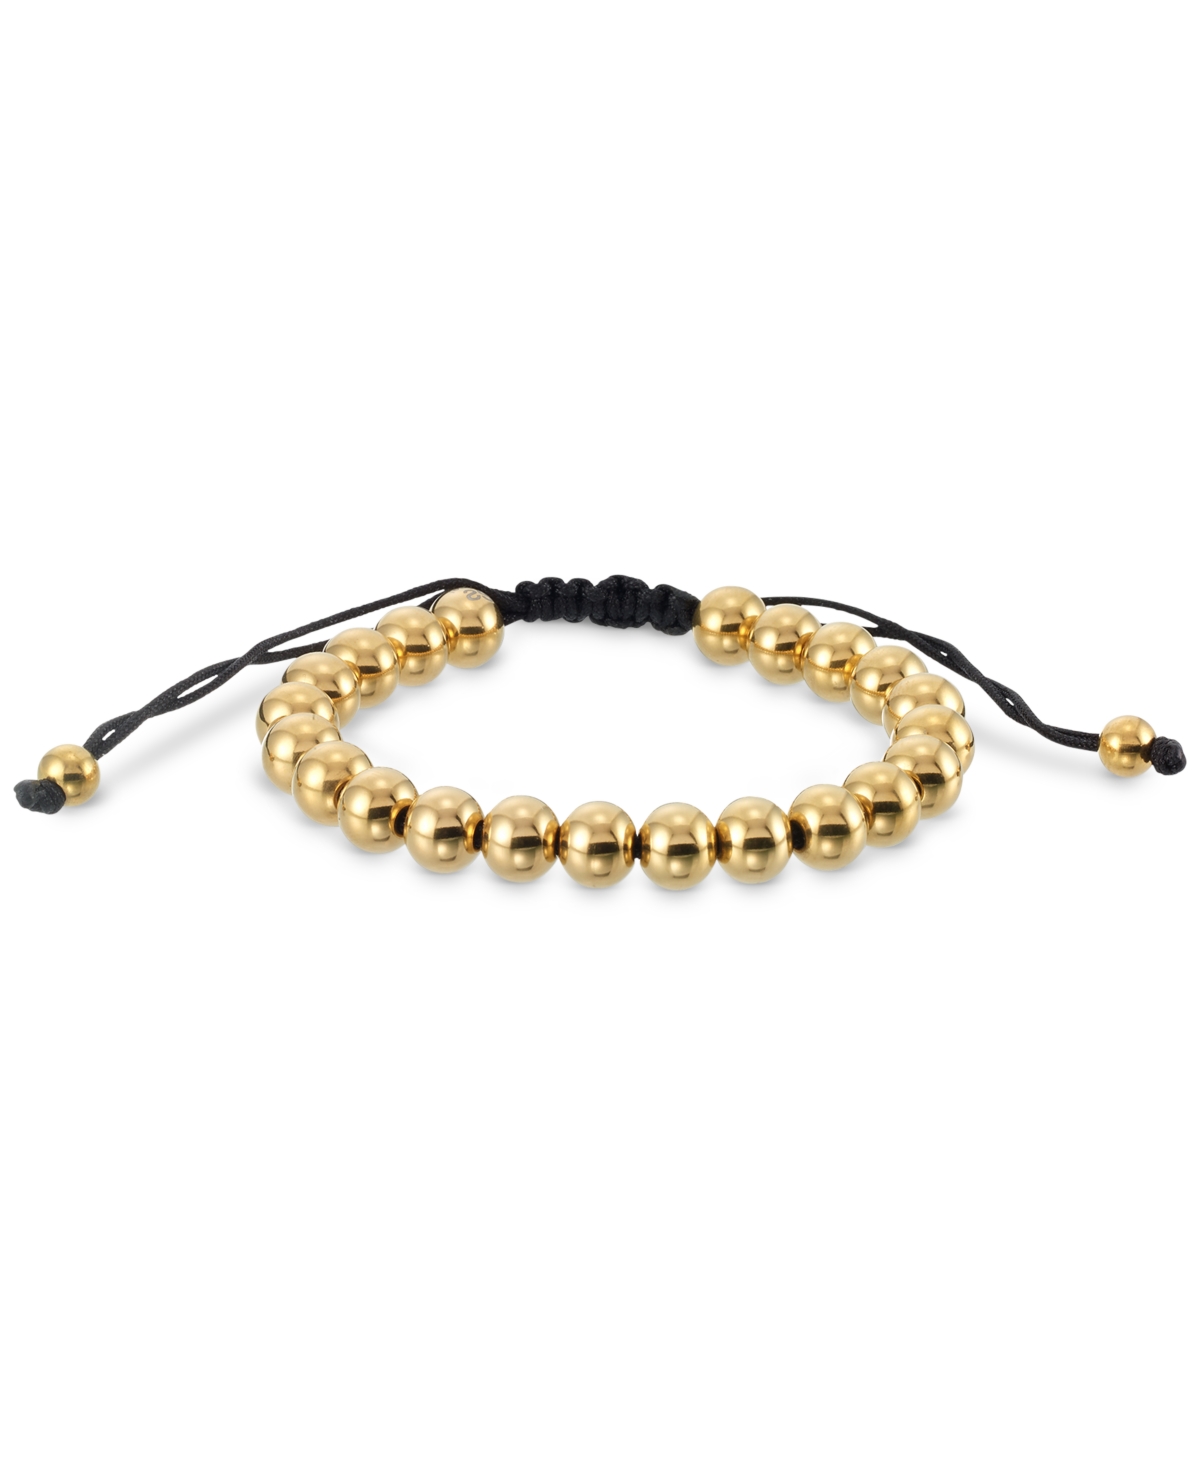 Smith Polished Bead Cord Bolo Bracelet in Gold-Tone Ion-Plated Stainless Steel - Gold-Tone